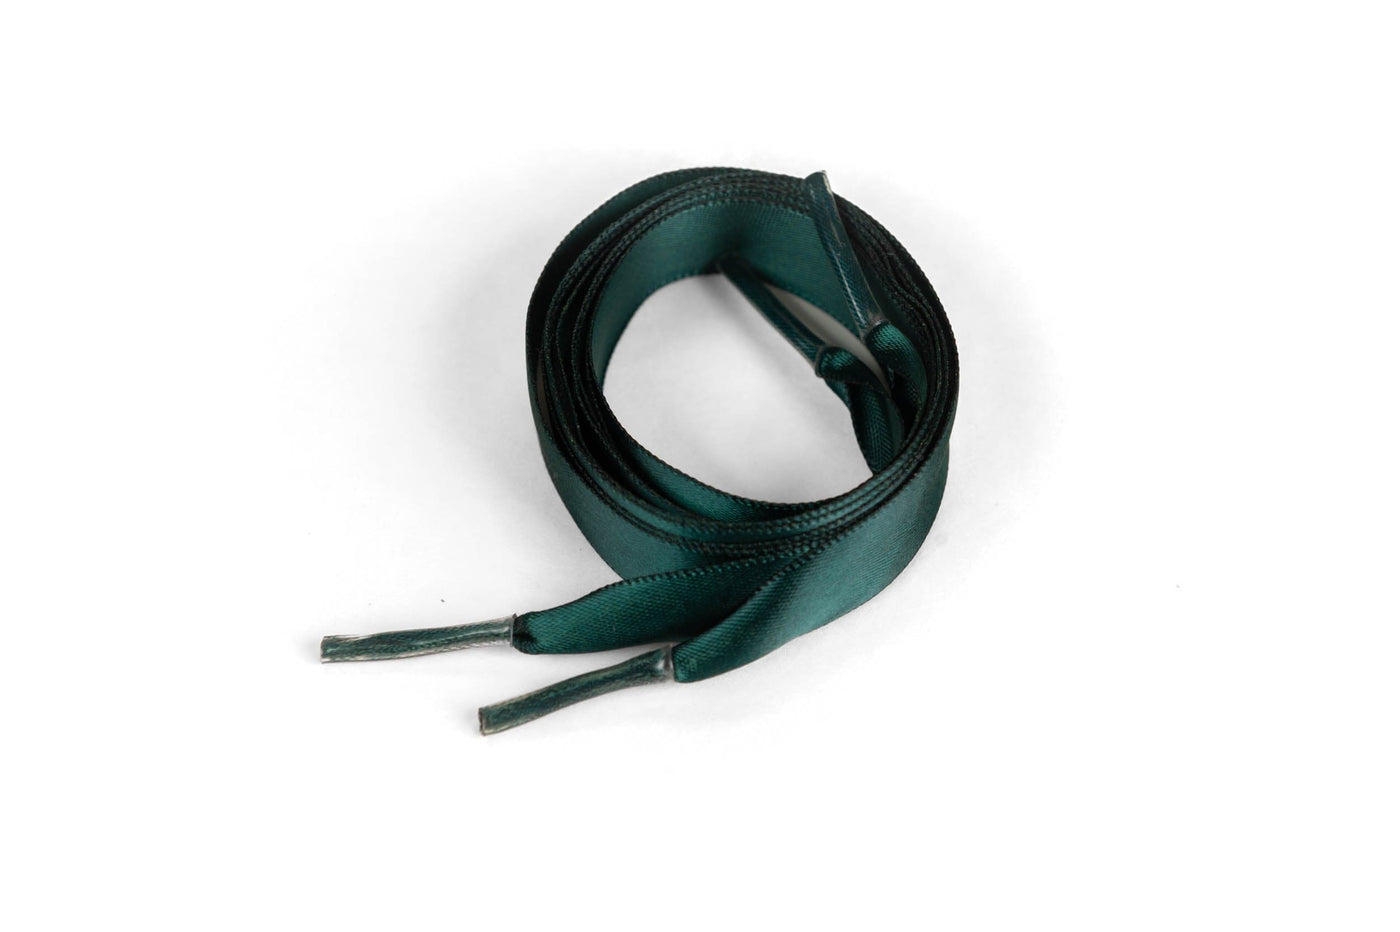 Satin Ribbon 5/8" Premium Quality Shoelaces - 96" Inch Length Teal